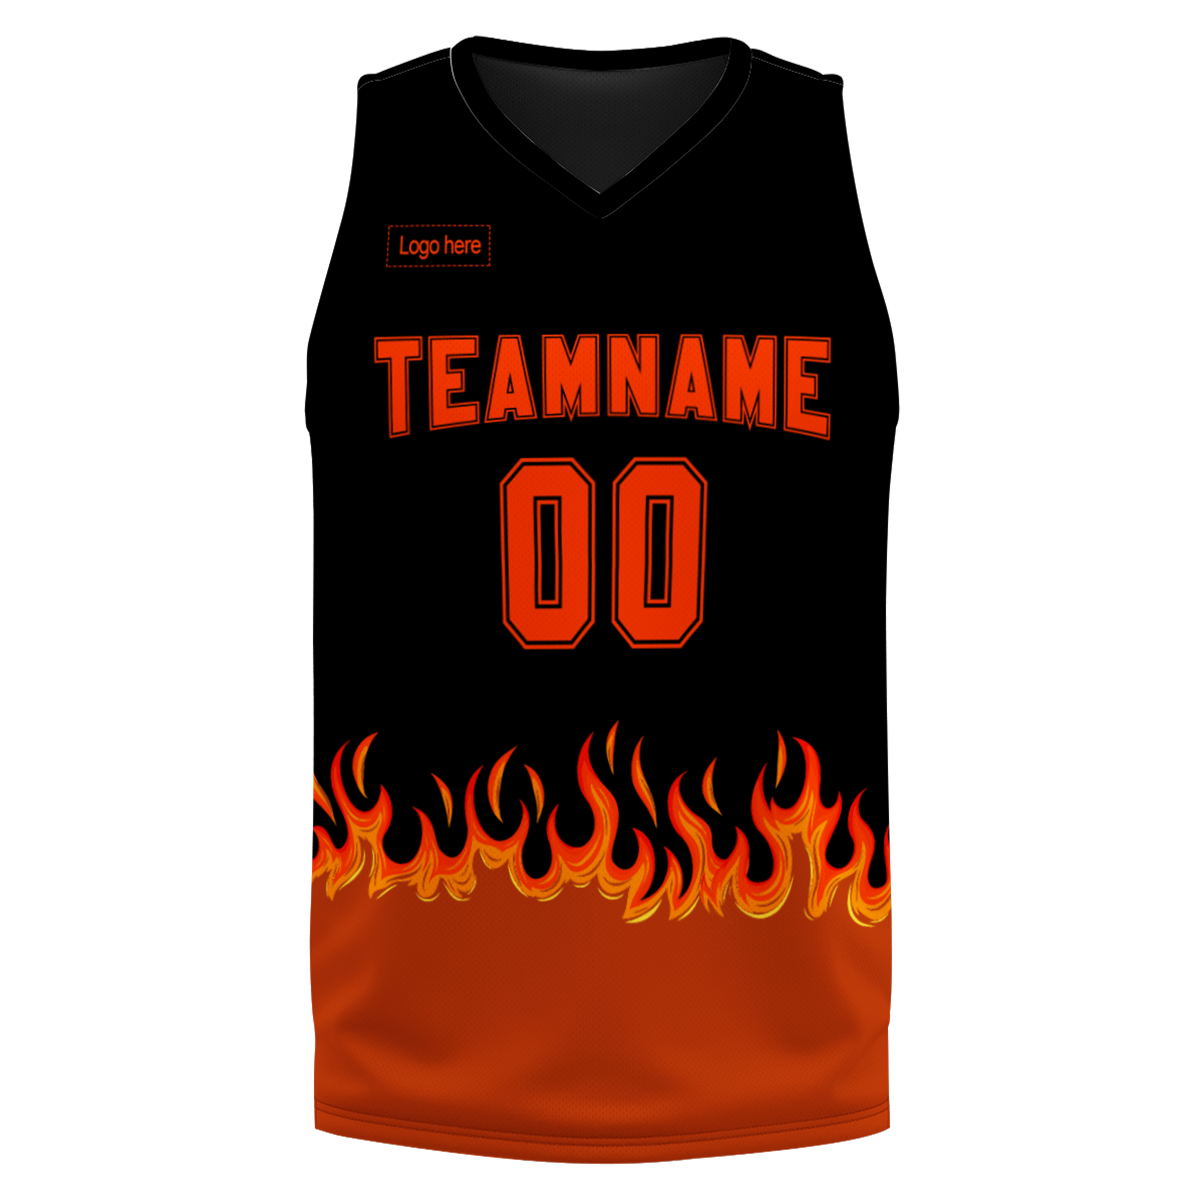 new-design-competitive-polyester-basketball-uniforms-digital-print-on-demand-basketball-suits-at-cj-pod-4